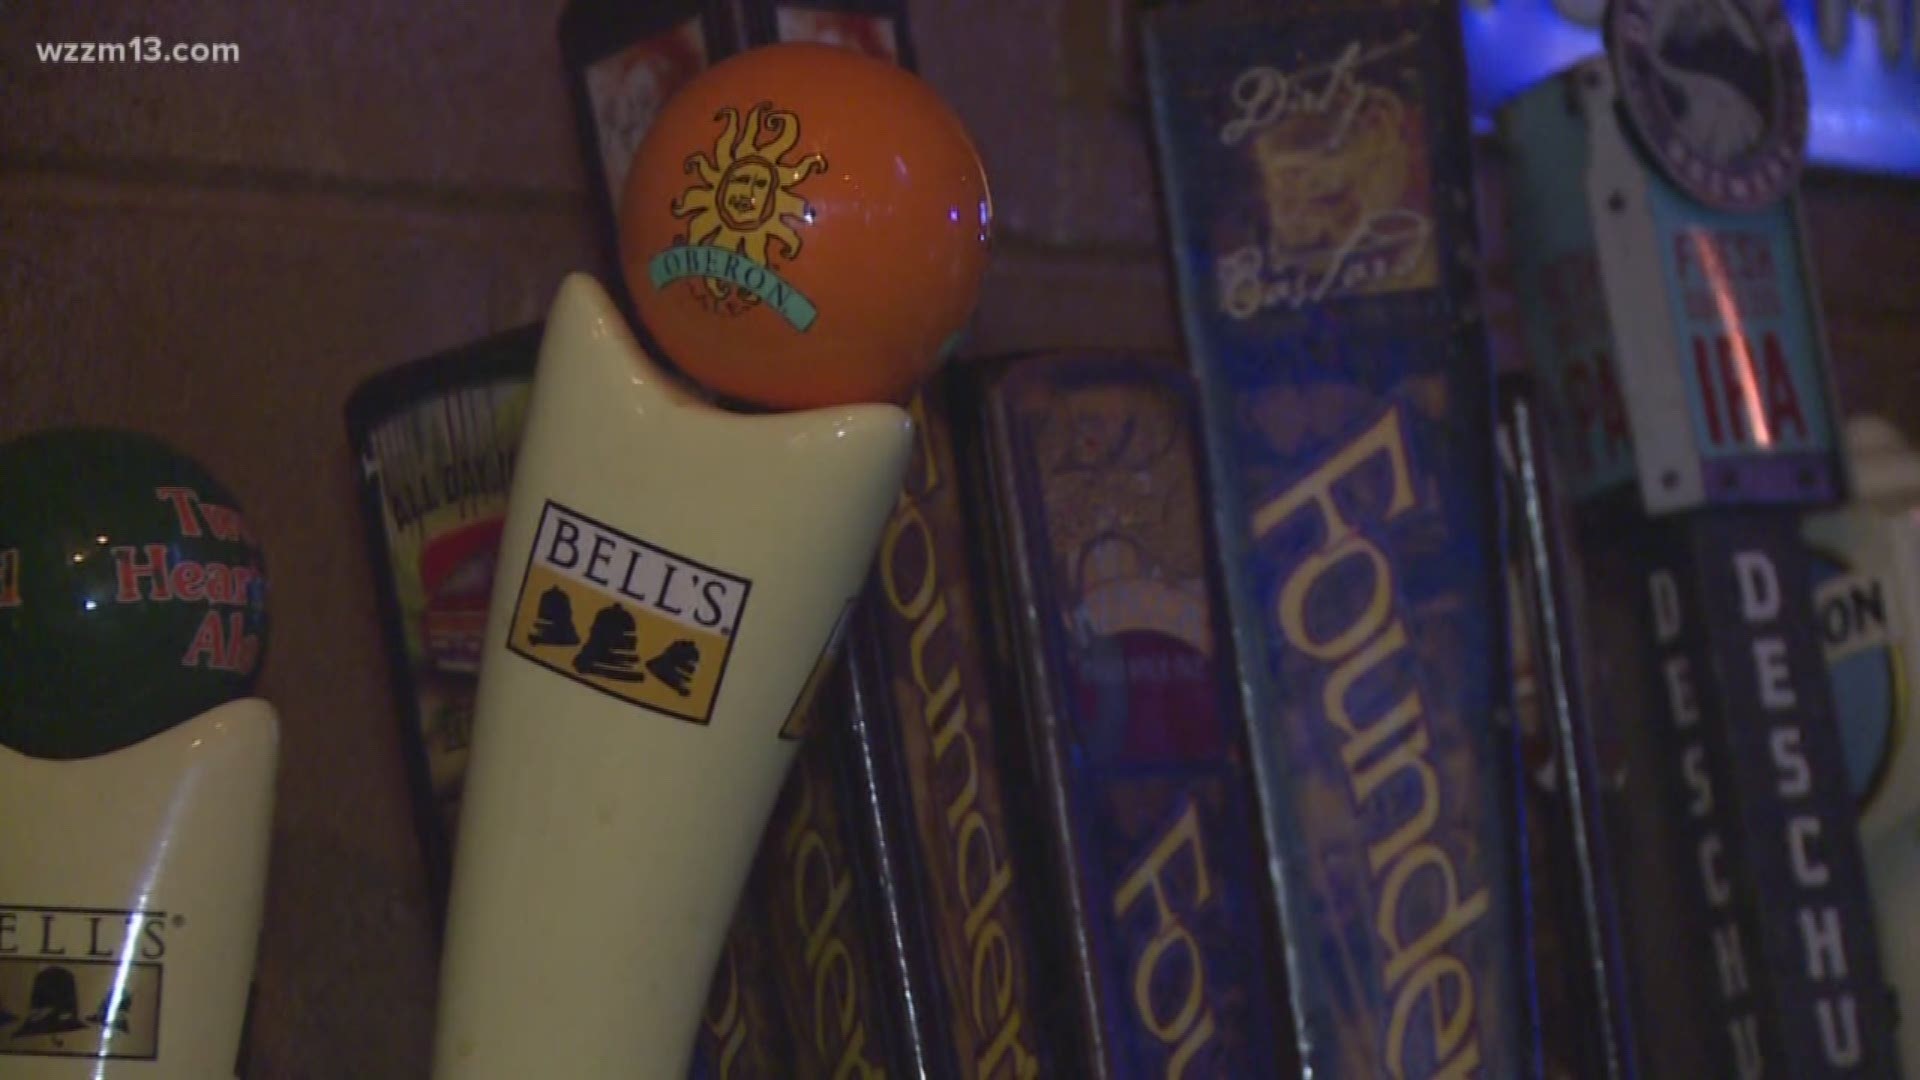 The brewery will be releasing their annual batch of Oberon.